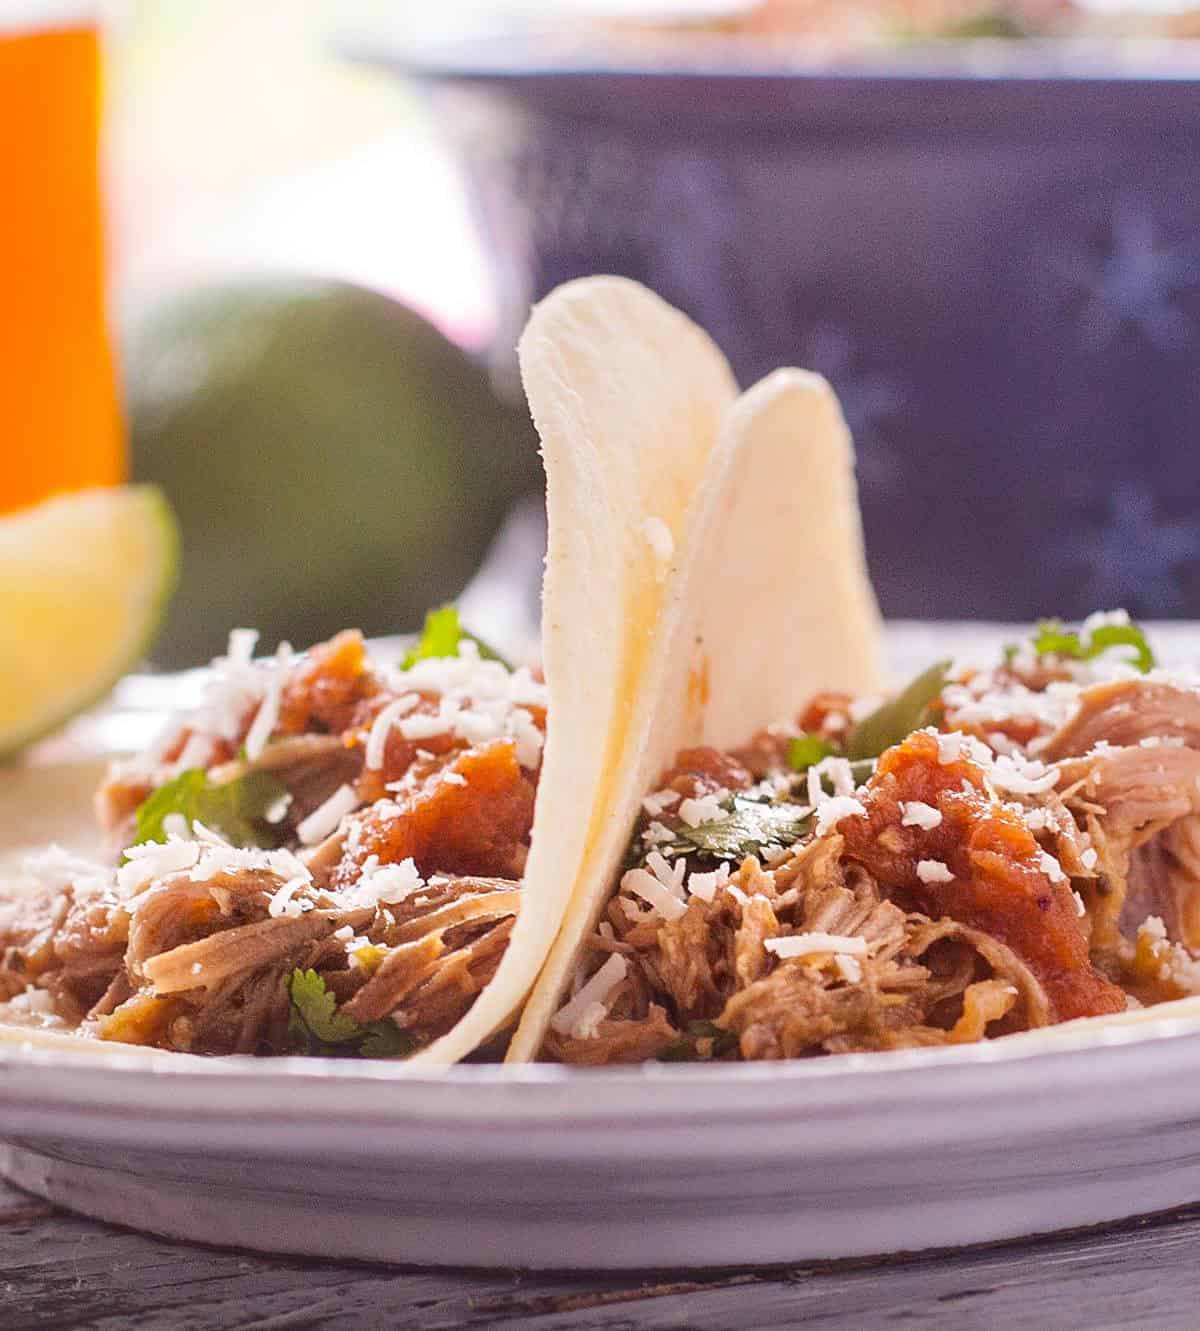  Get ready to fall in love with the tender, shredded goodness of Pork Machaca!